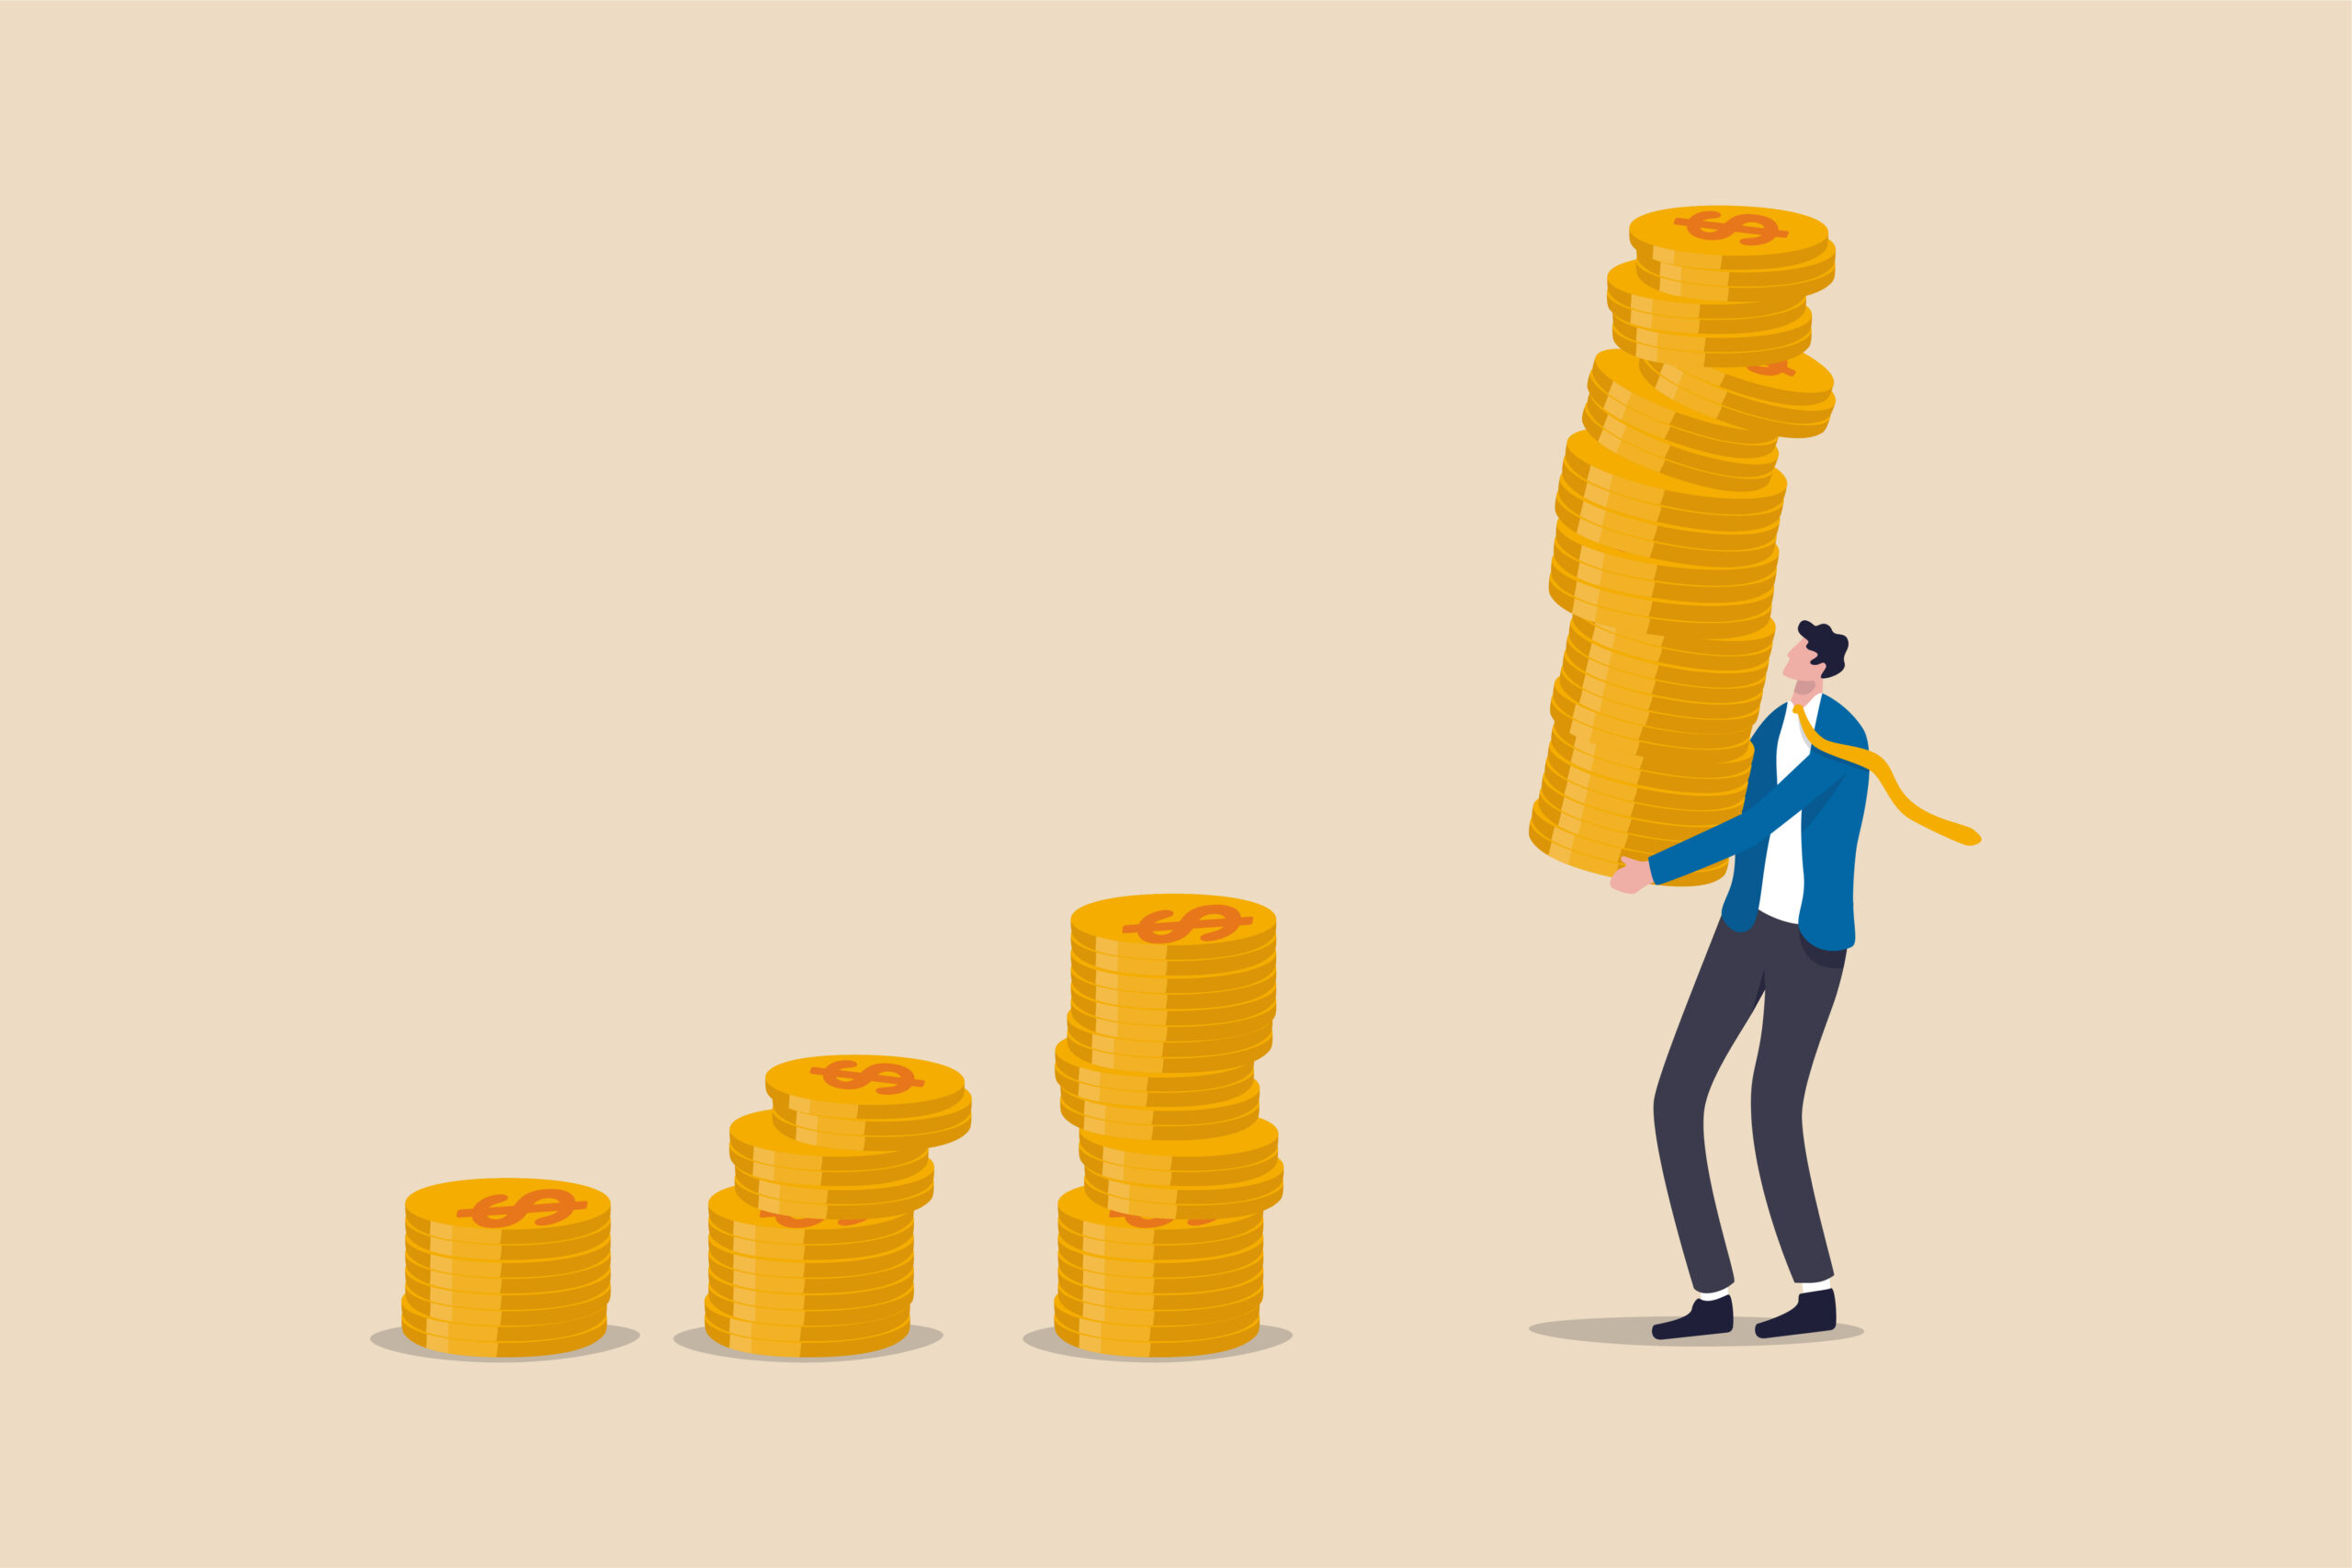 A fundraiser carrying a large pile of money. (How Much Does Your Salary Matter? The Role of Power, Position, and Money, Part 3)